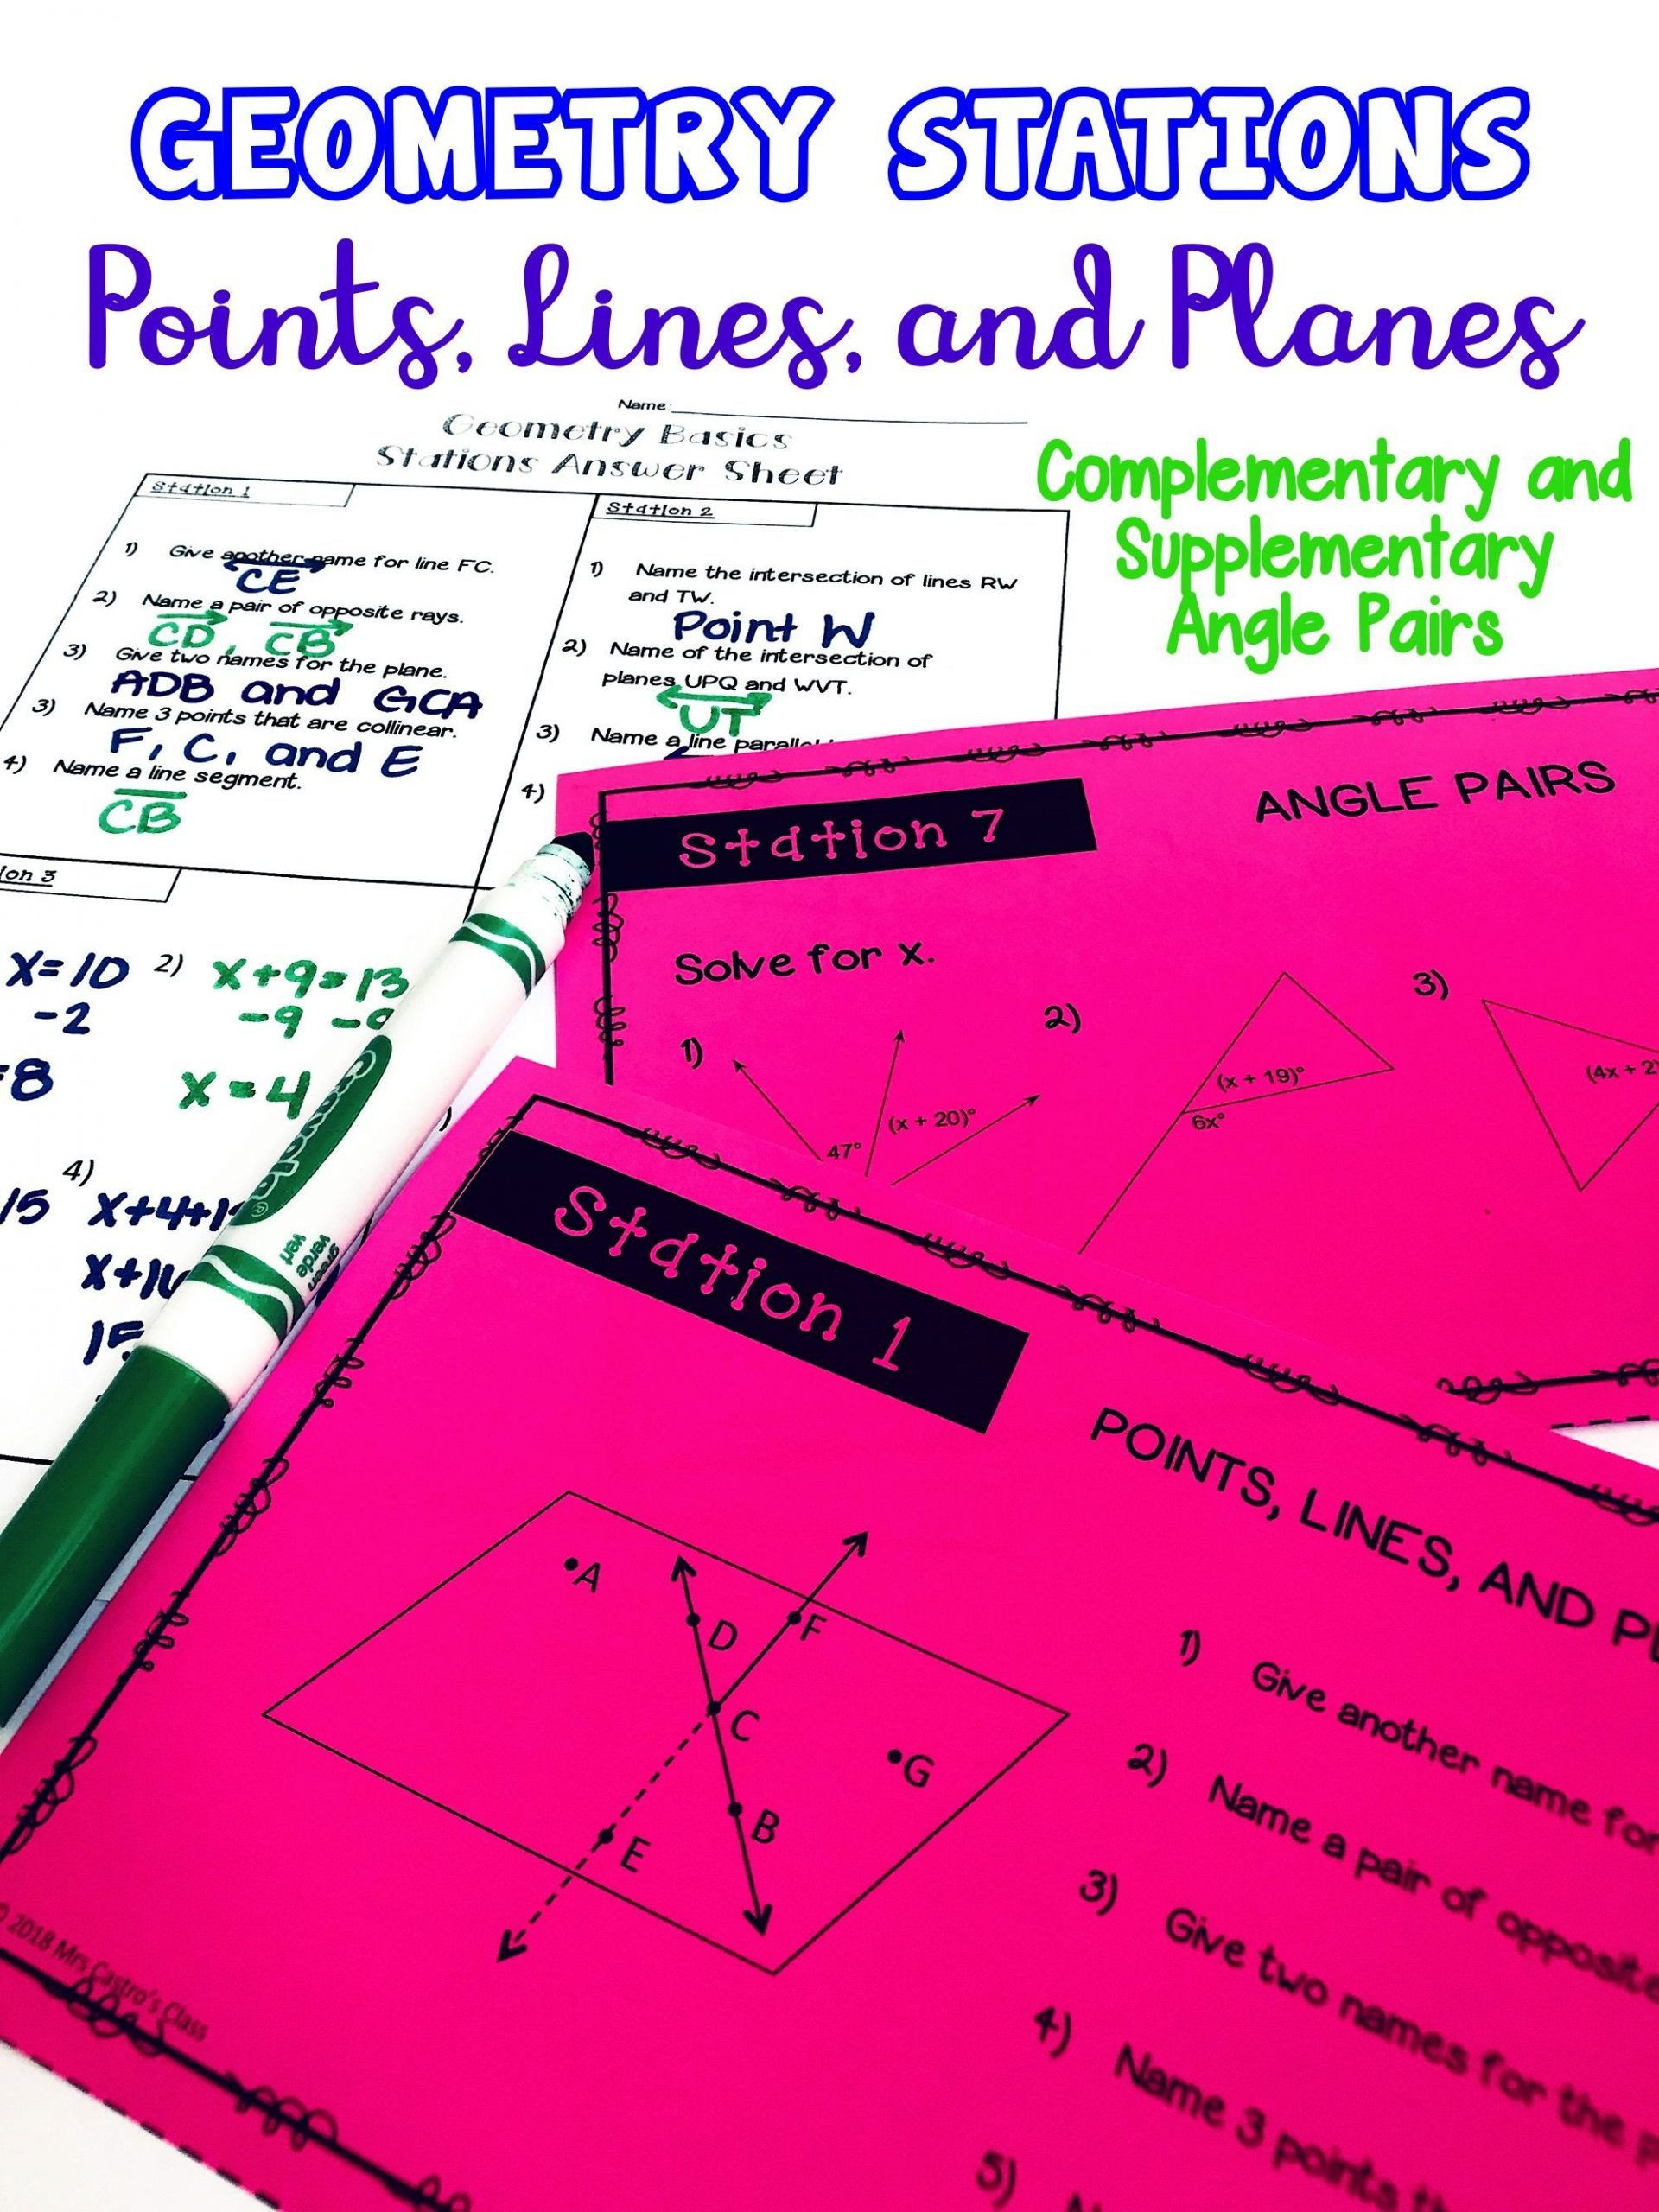 Points Lines and Planes Worksheet Pin On Printable Blank Worksheet Template